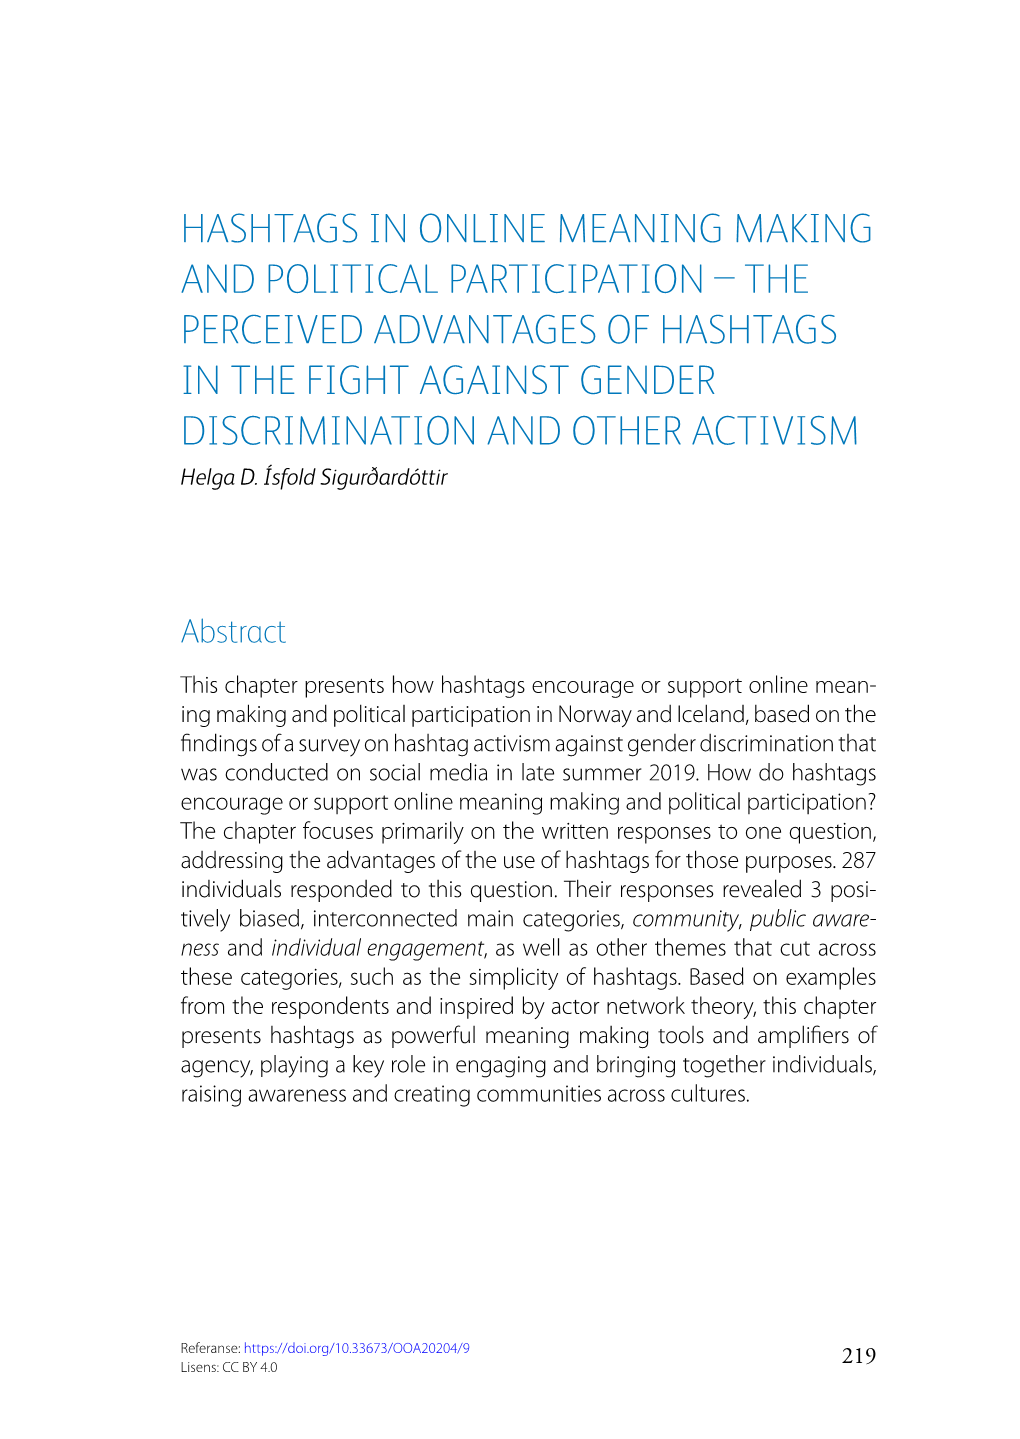 Hashtags in Online Meaning Making and Political